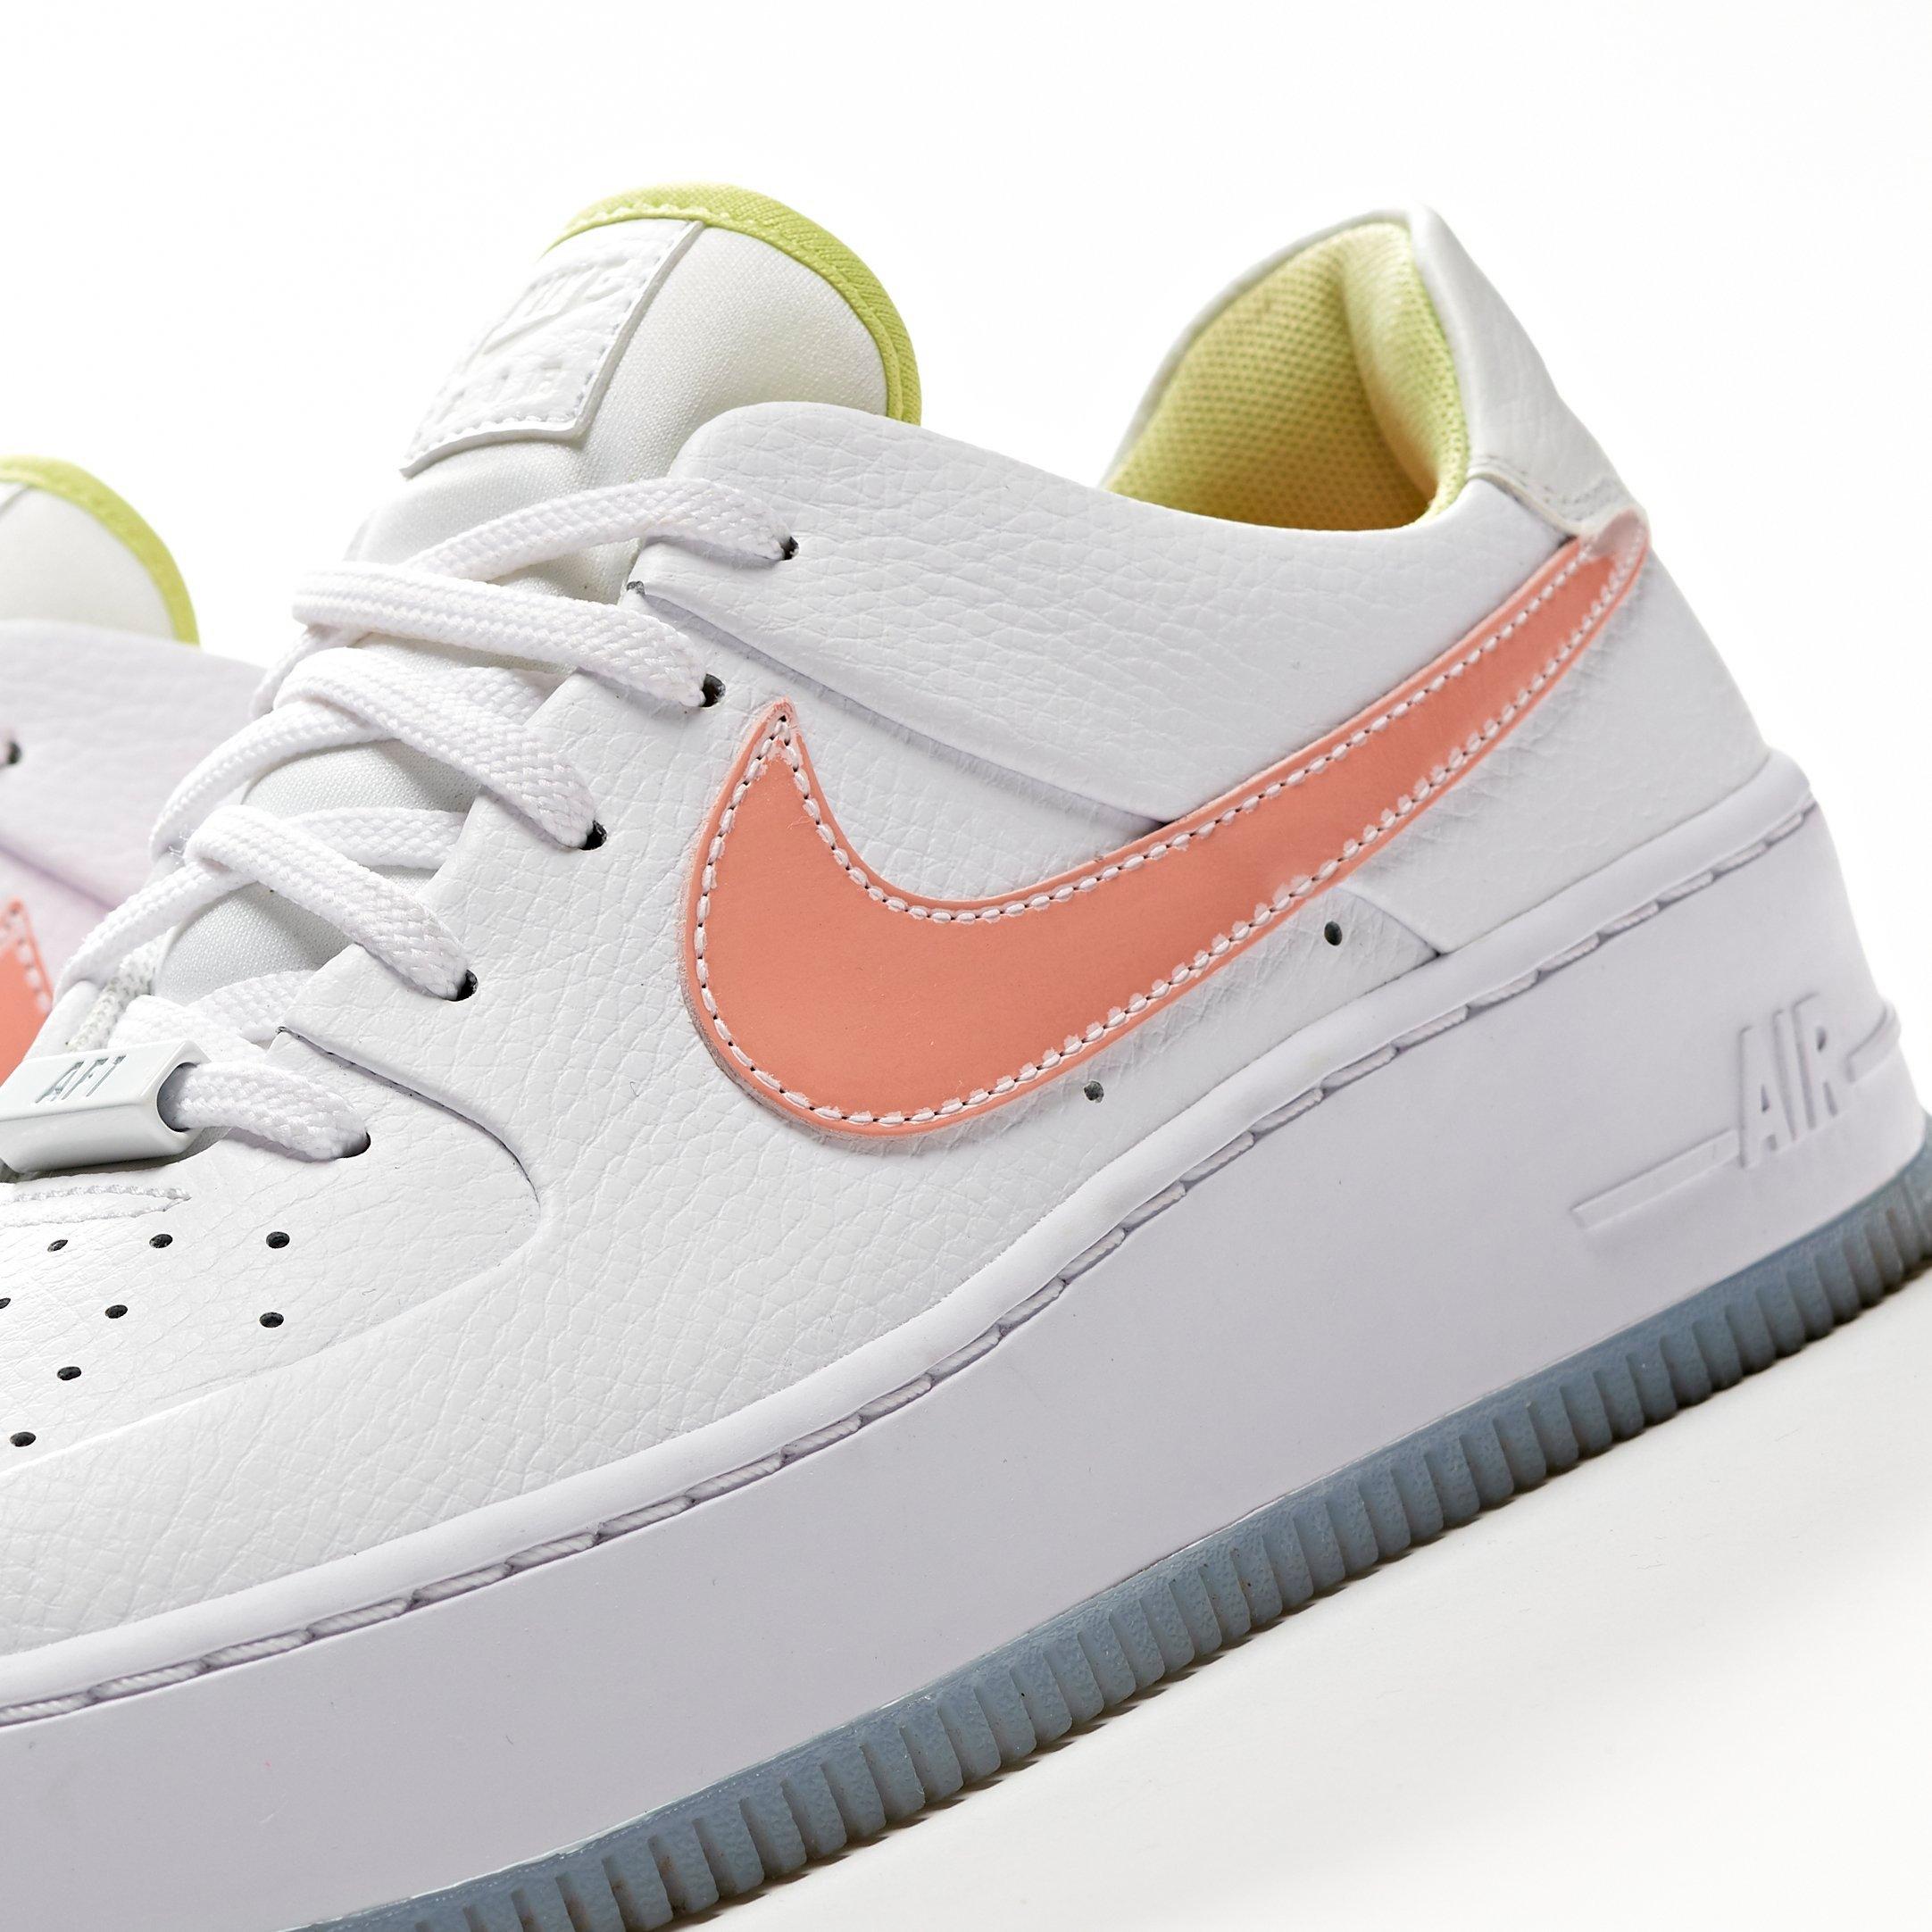 nike air force 1 sage low sneakers in white